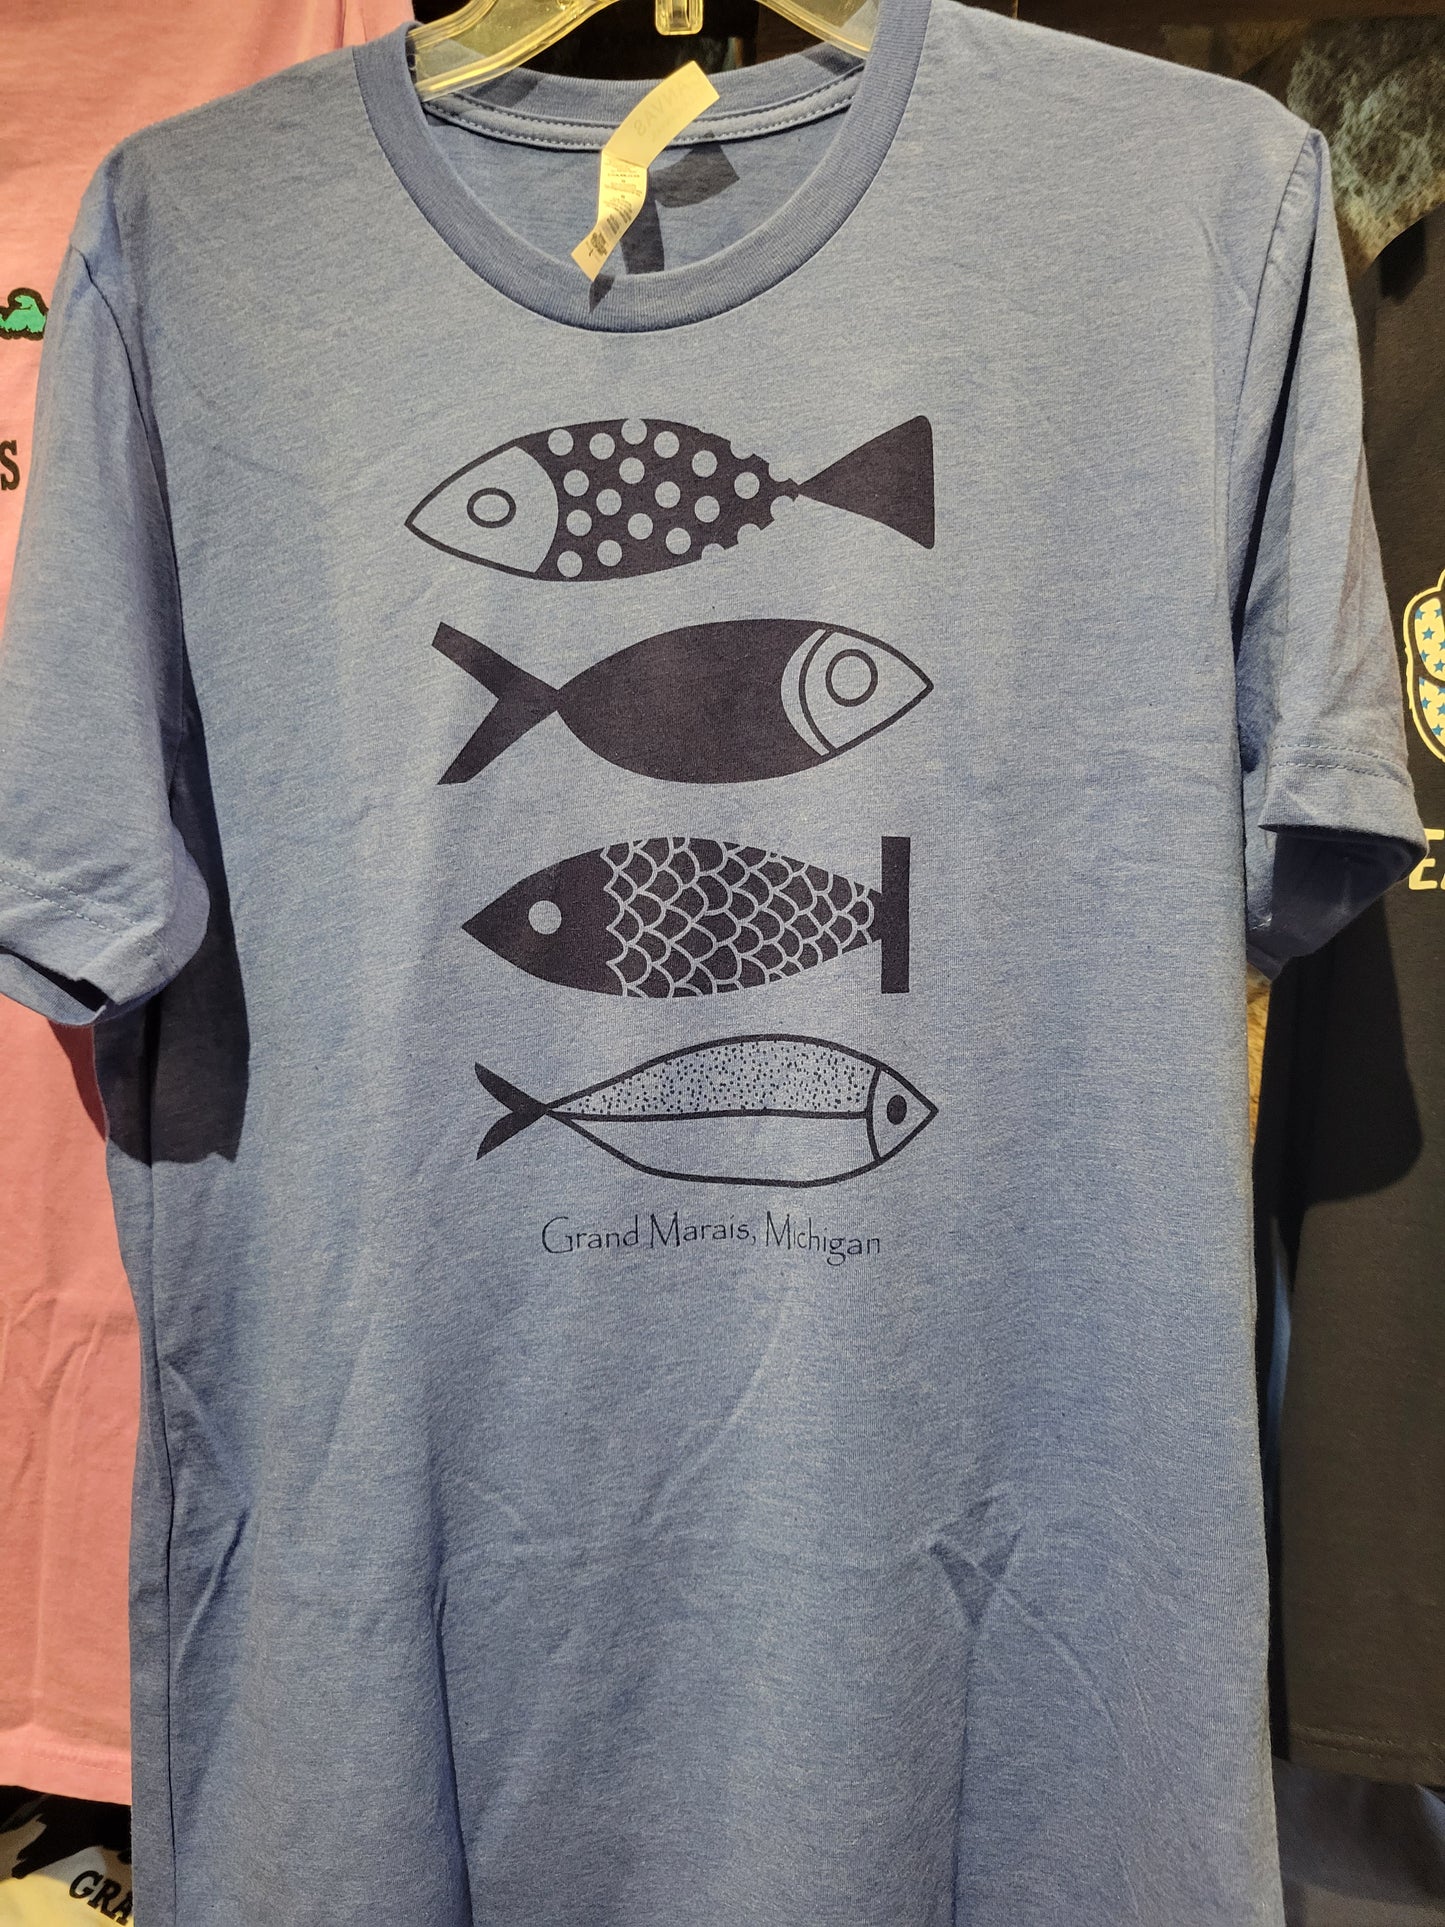 Four Fishes short sleeve T shirt